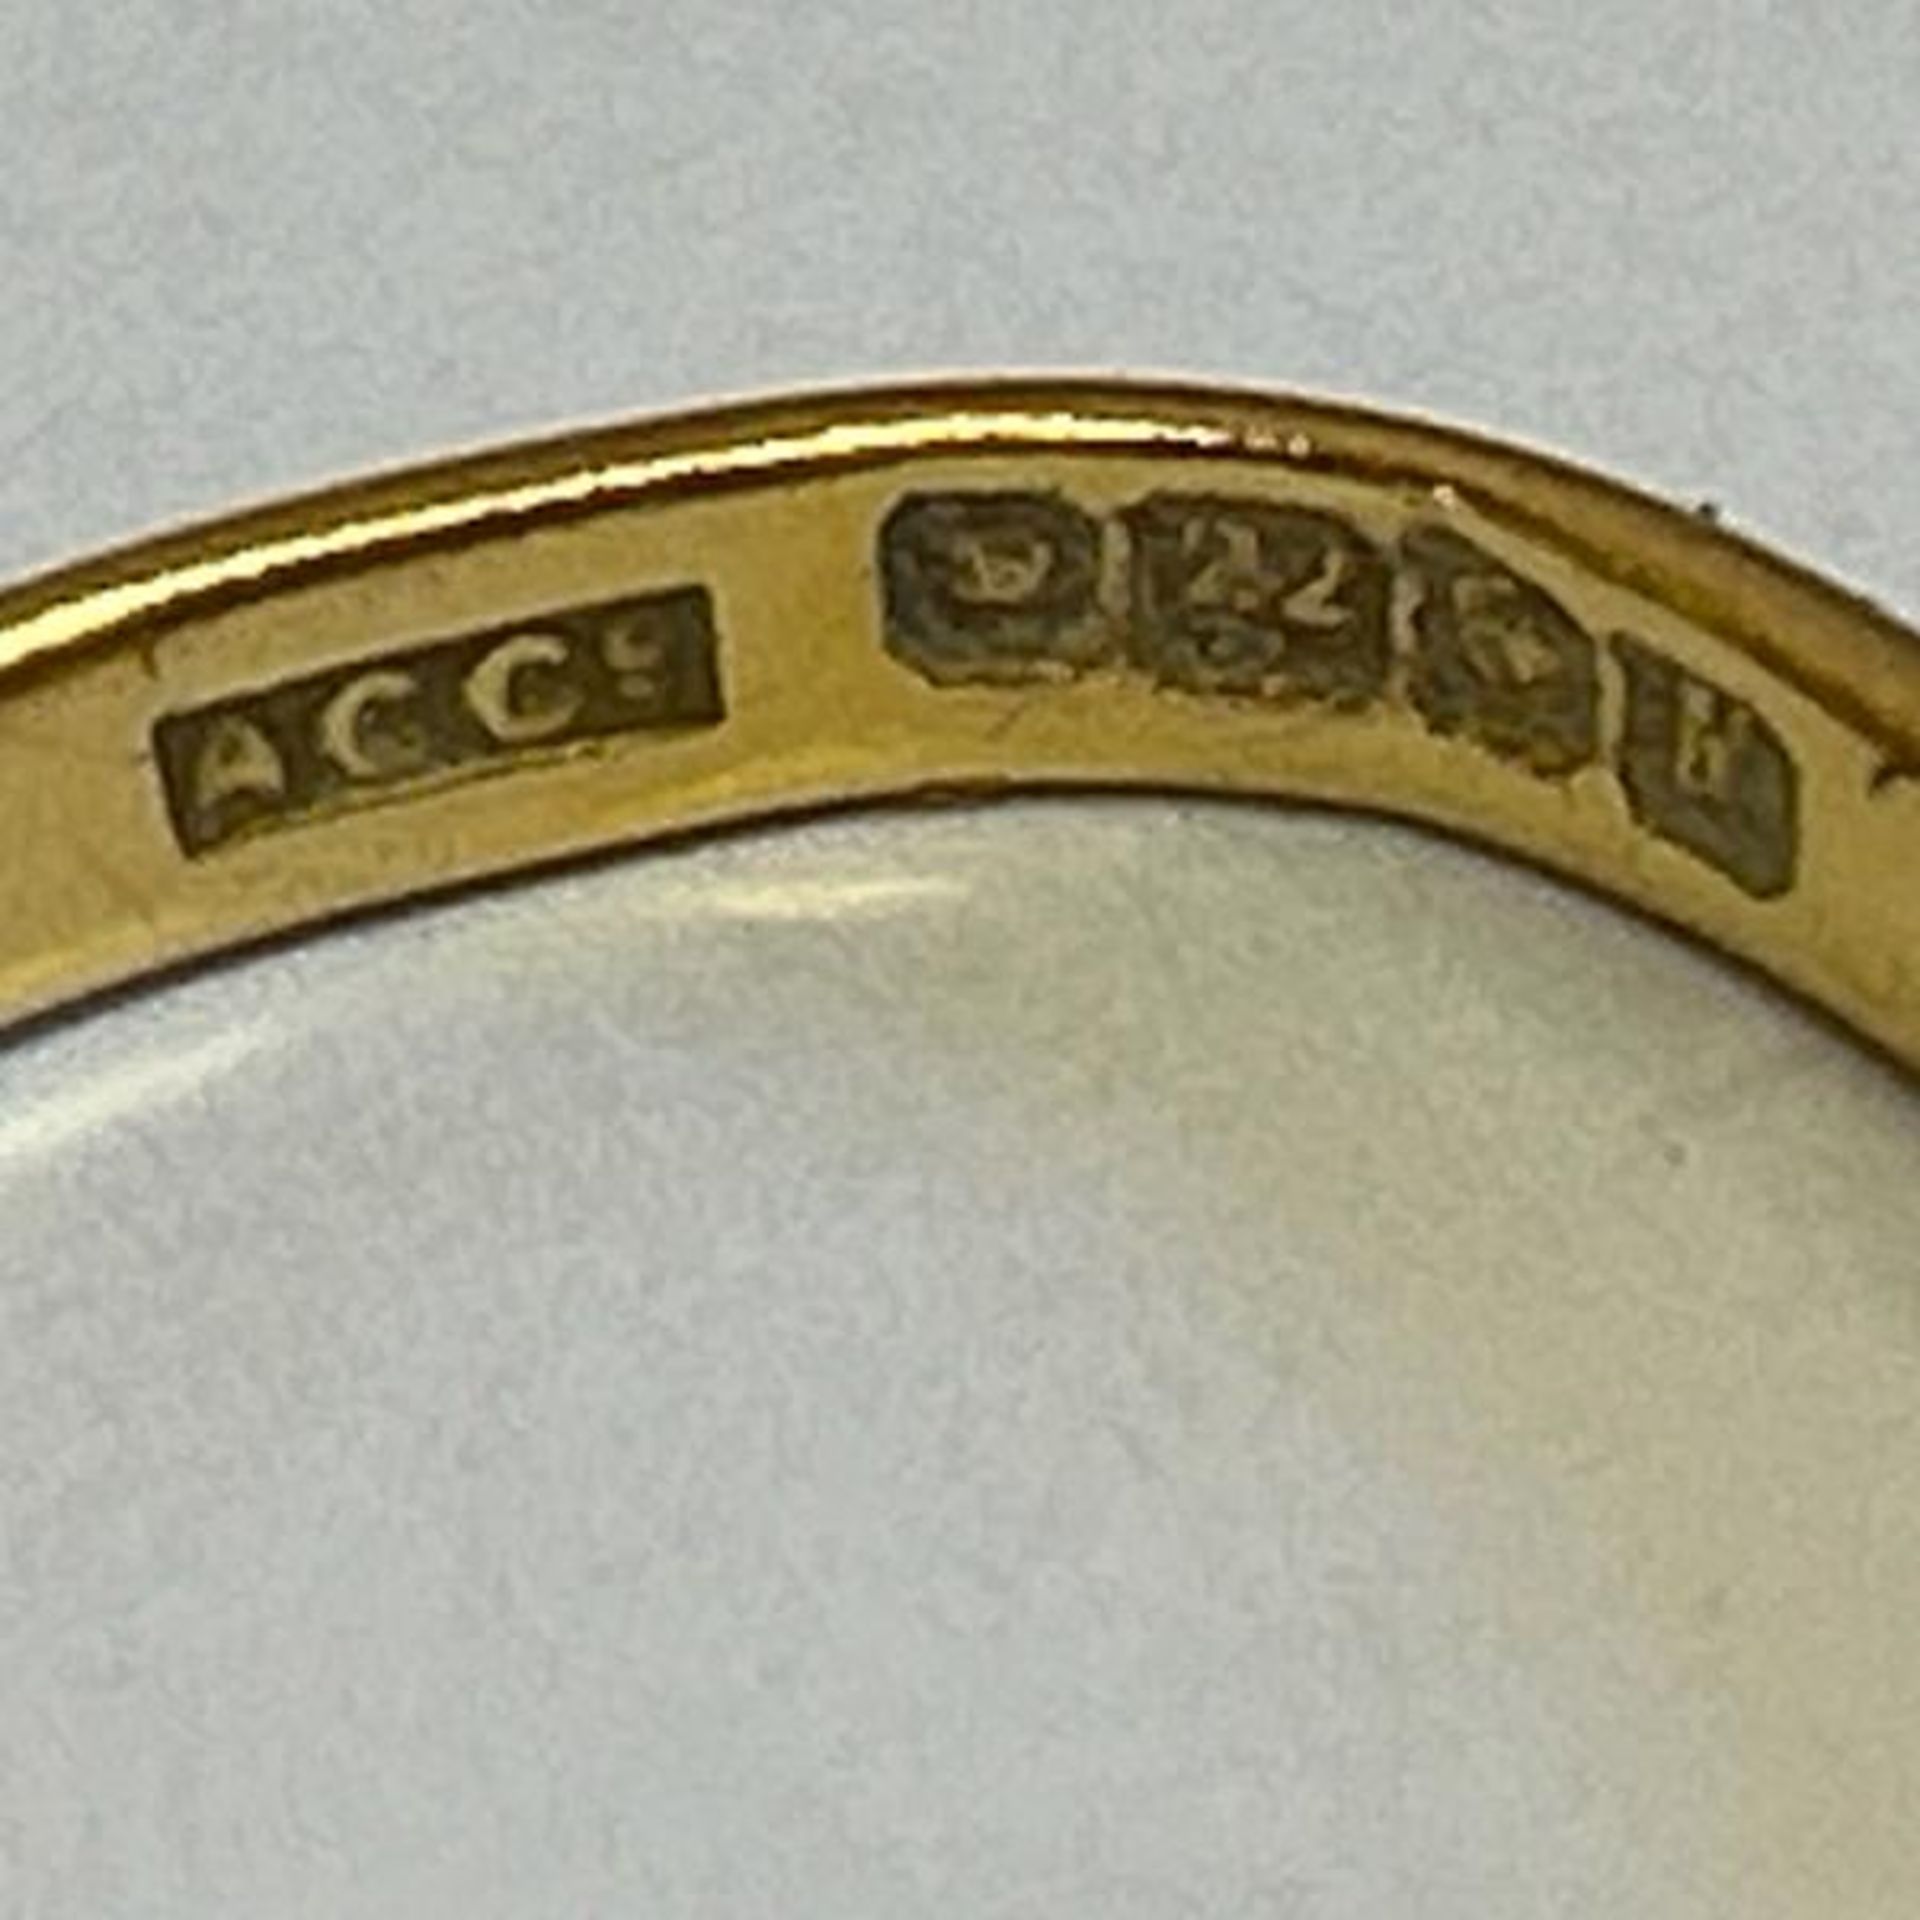 22ct gold hallmarked wedding band, ring size L, gross weight 2.24g / SF - Image 2 of 2